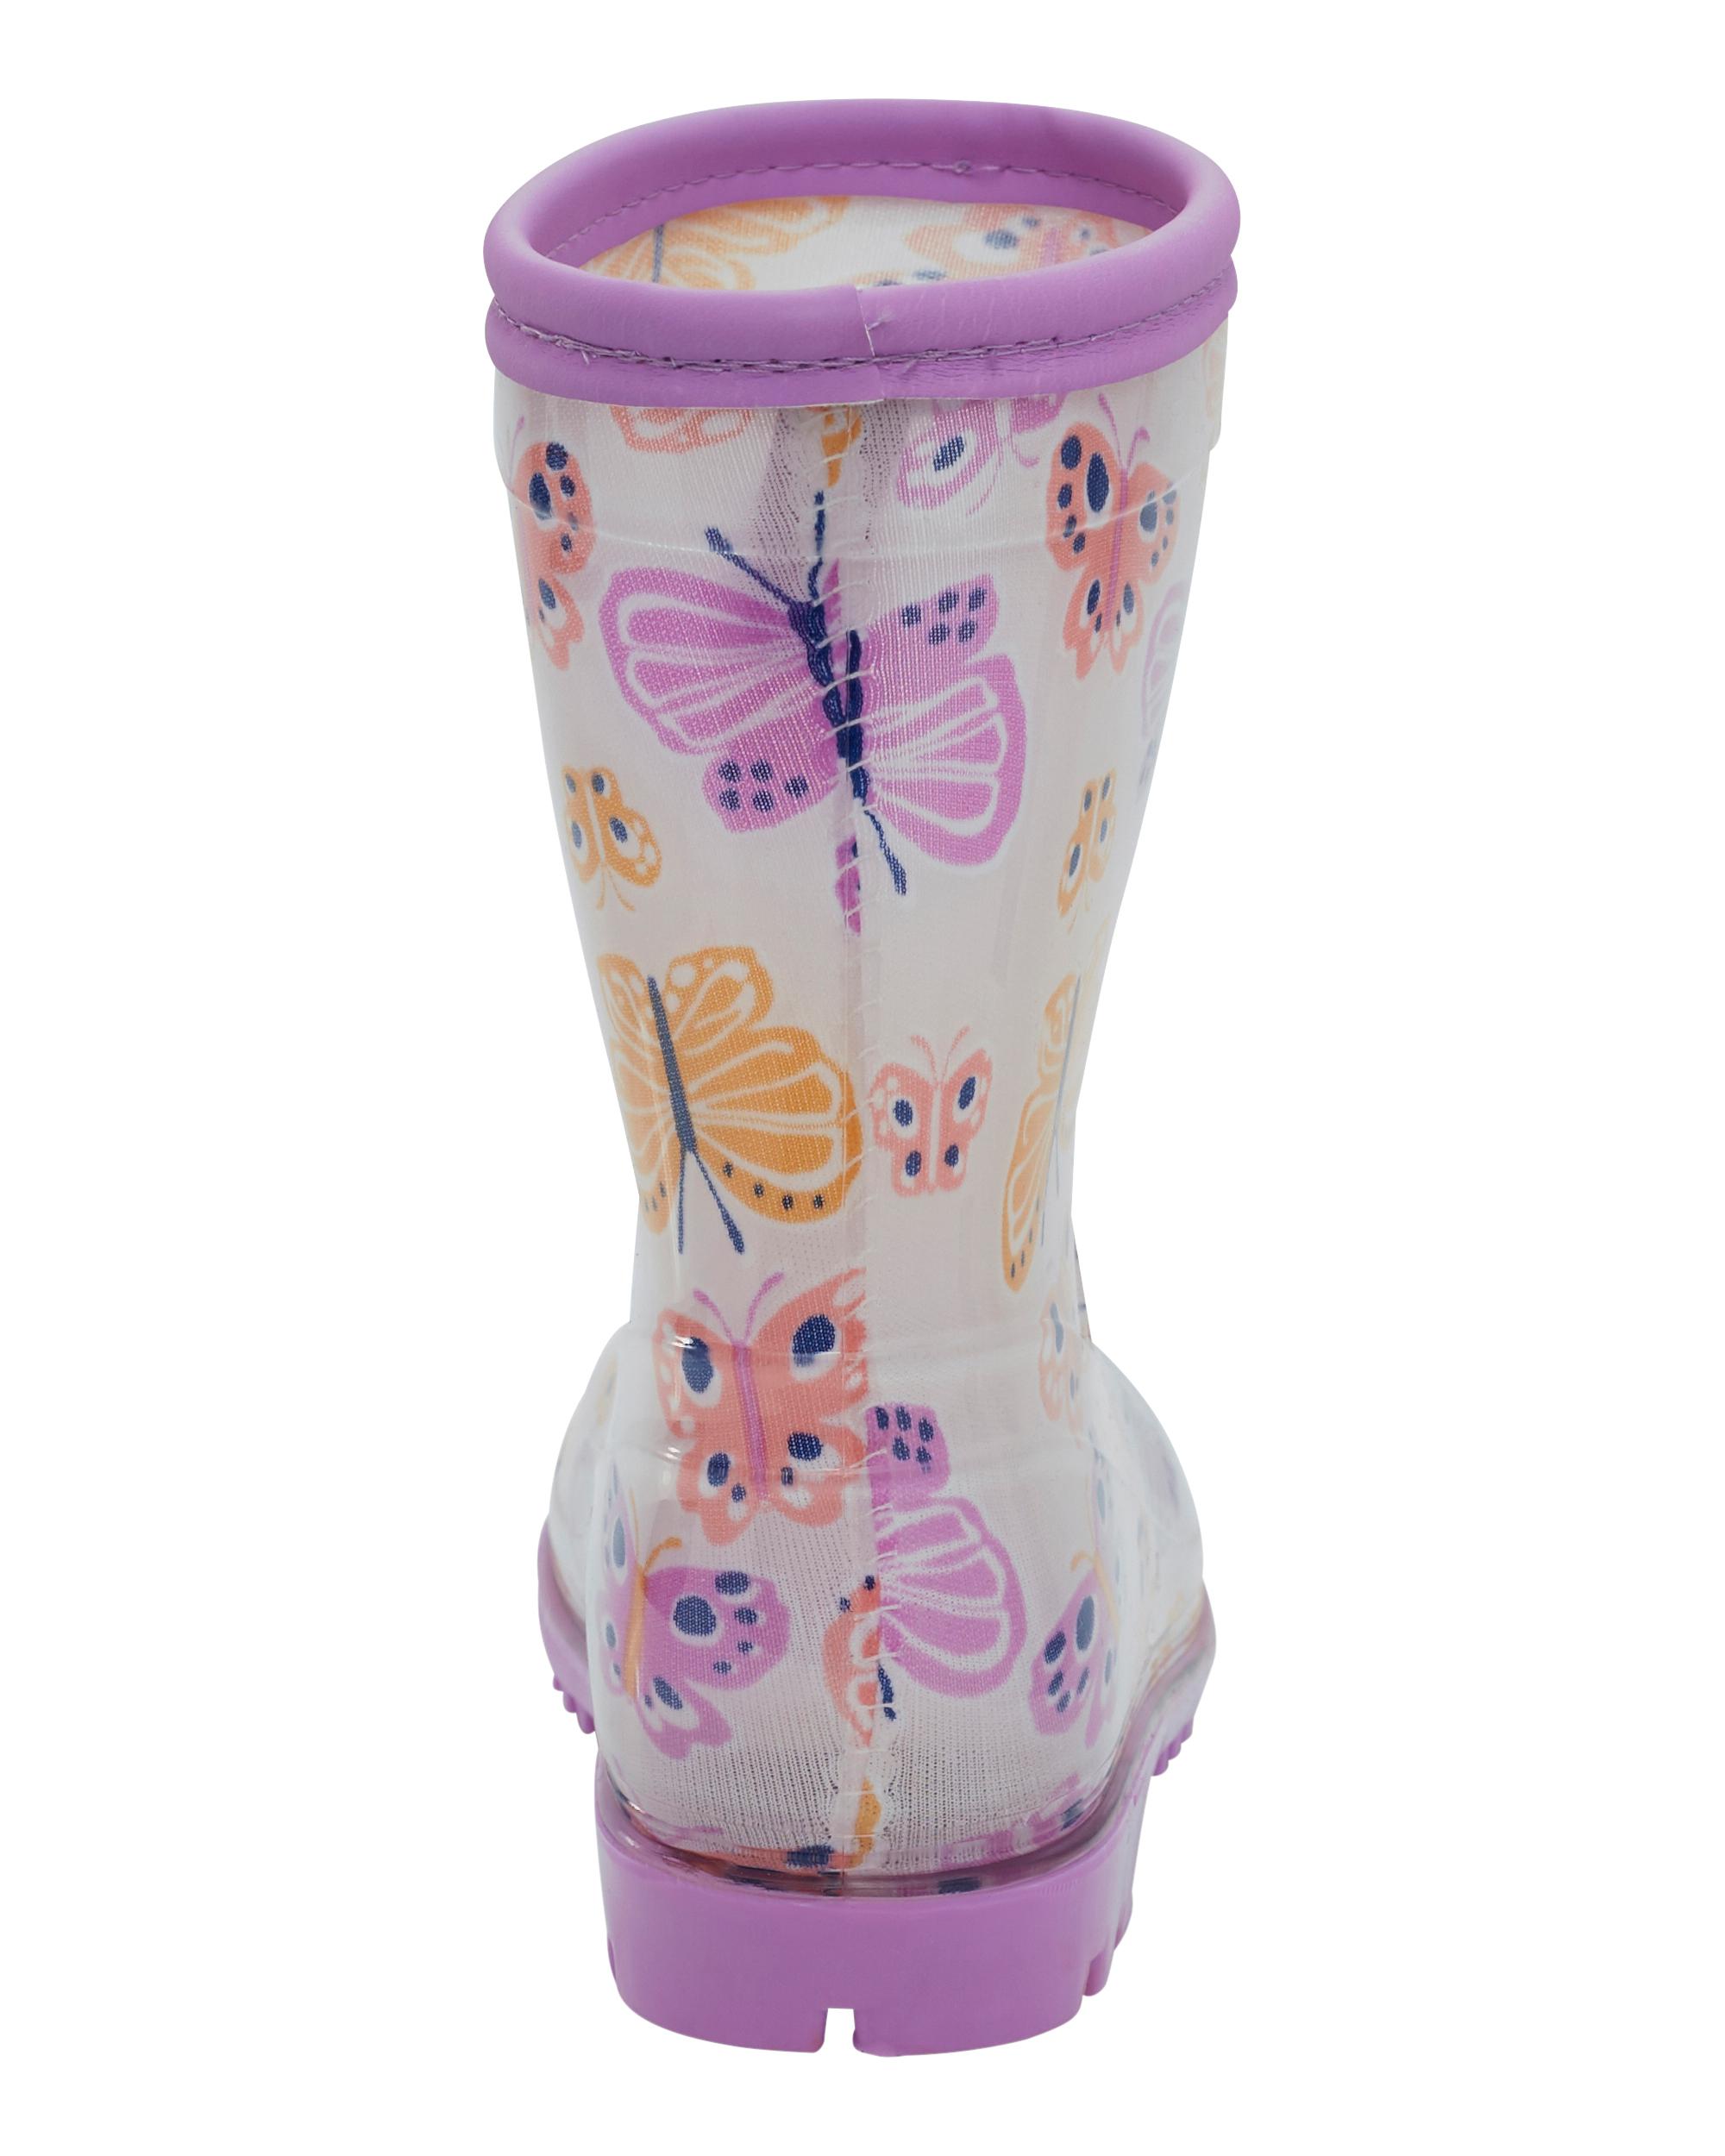 Toddler Butterfly Print Rain Boots